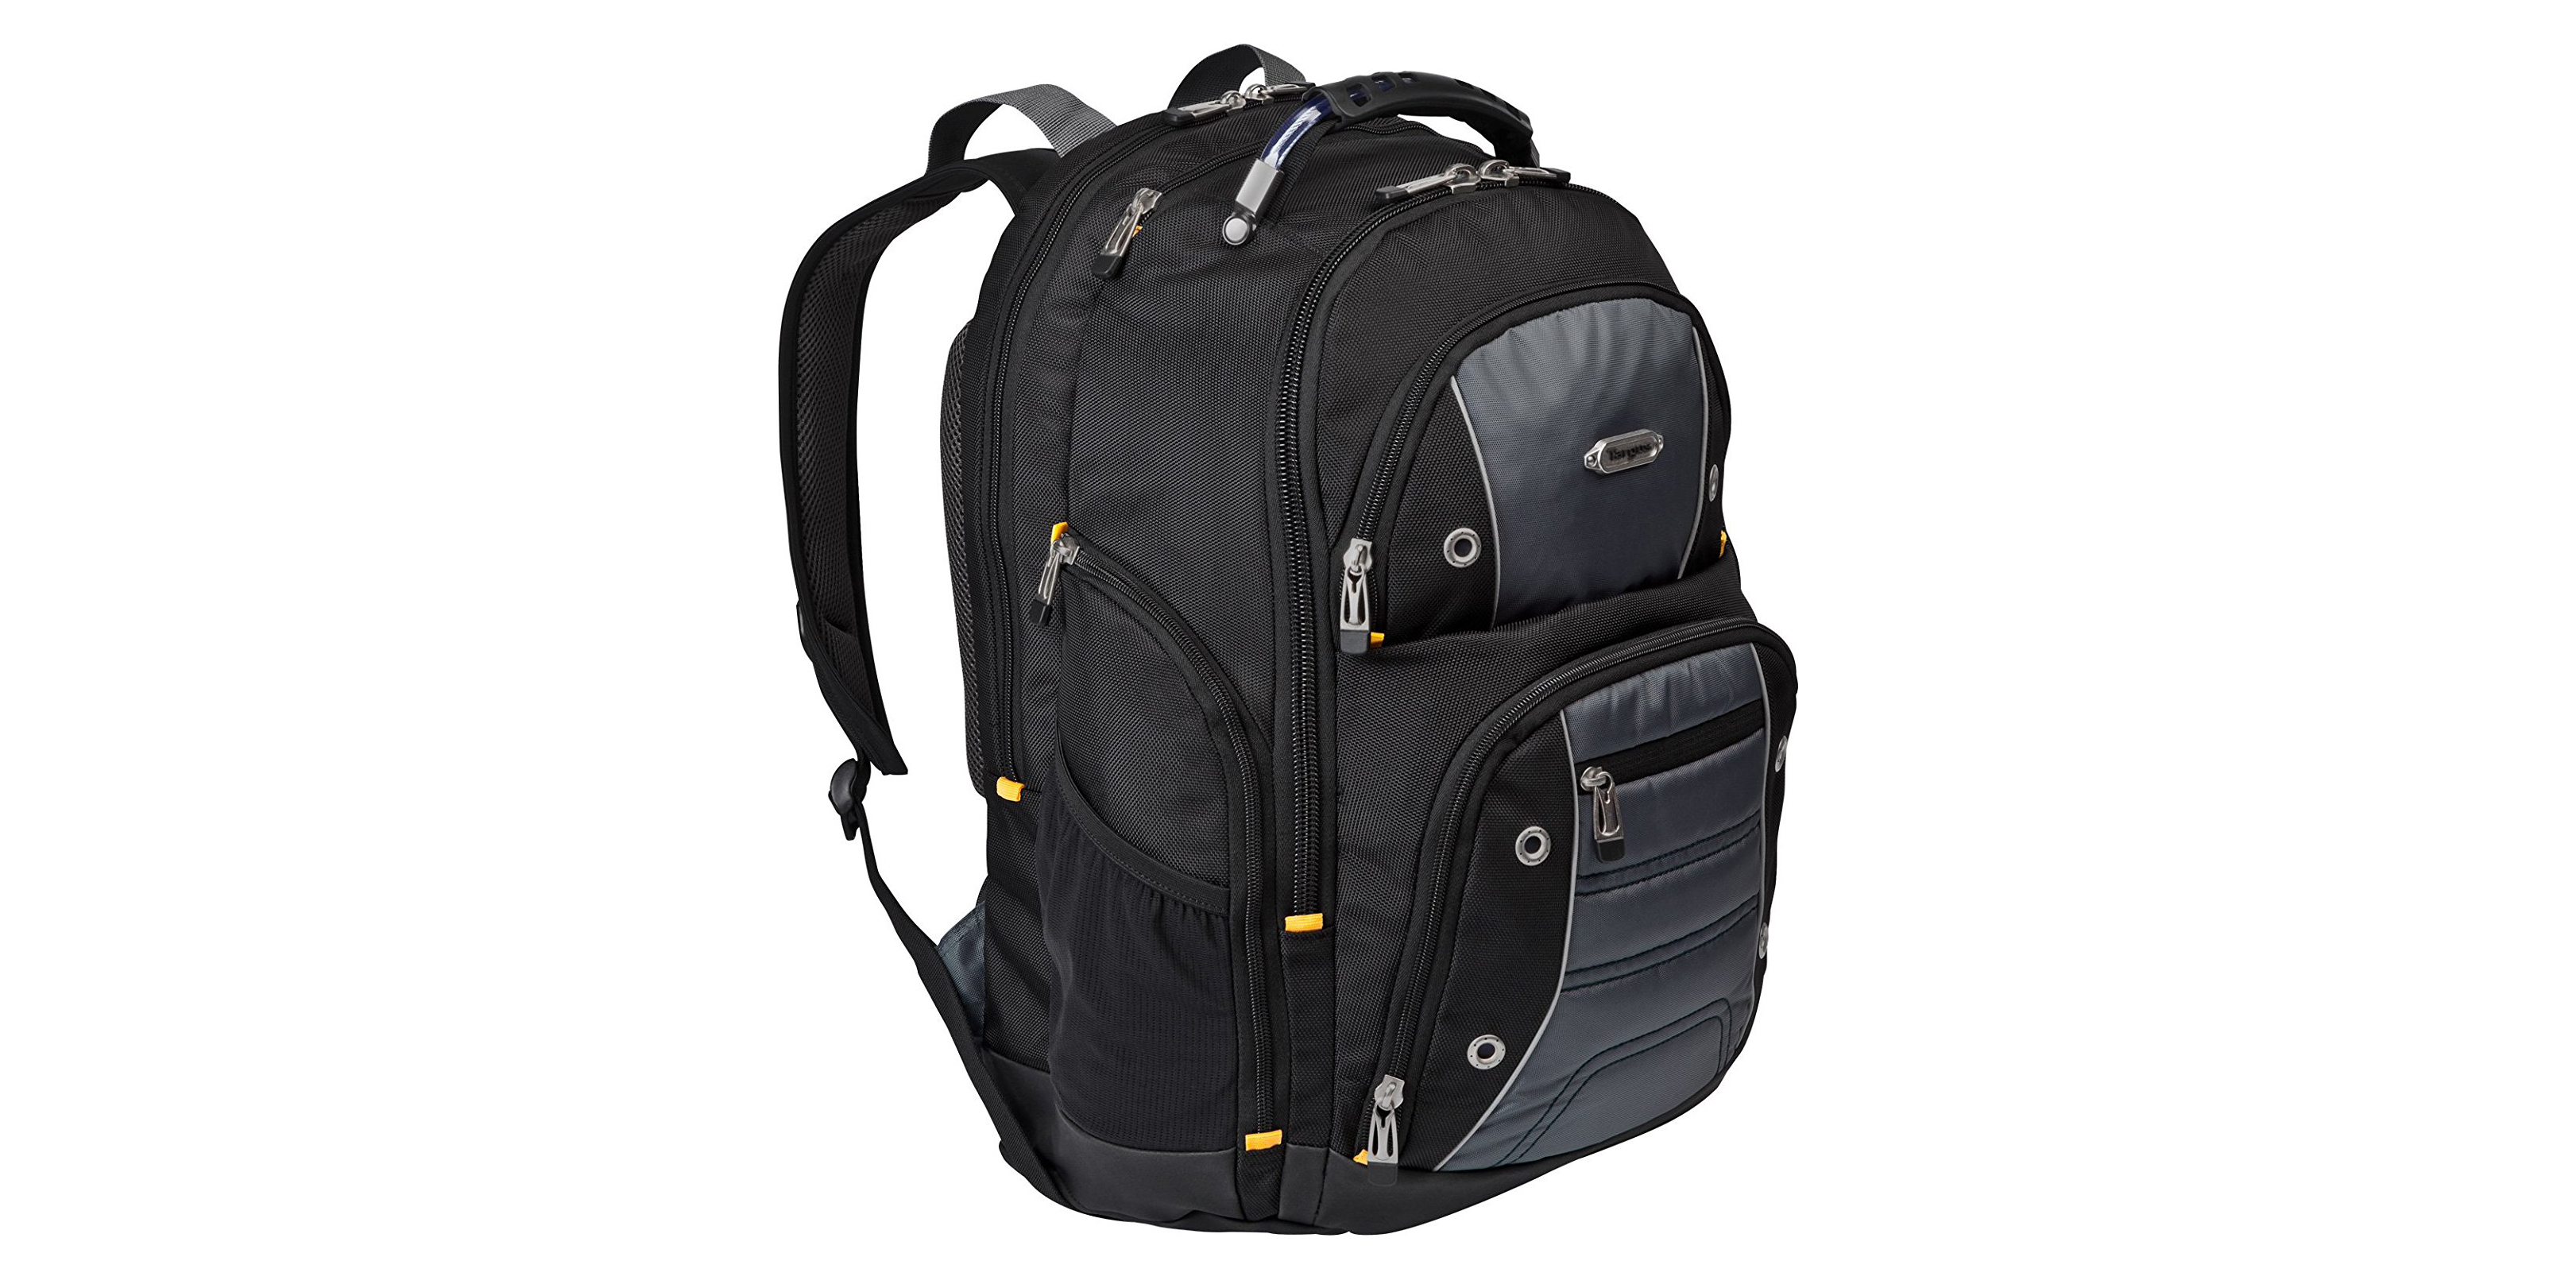 The Targus Drifter Backpack has room for your MacBook, more for $36 (Reg. $50+) - 9to5Toys